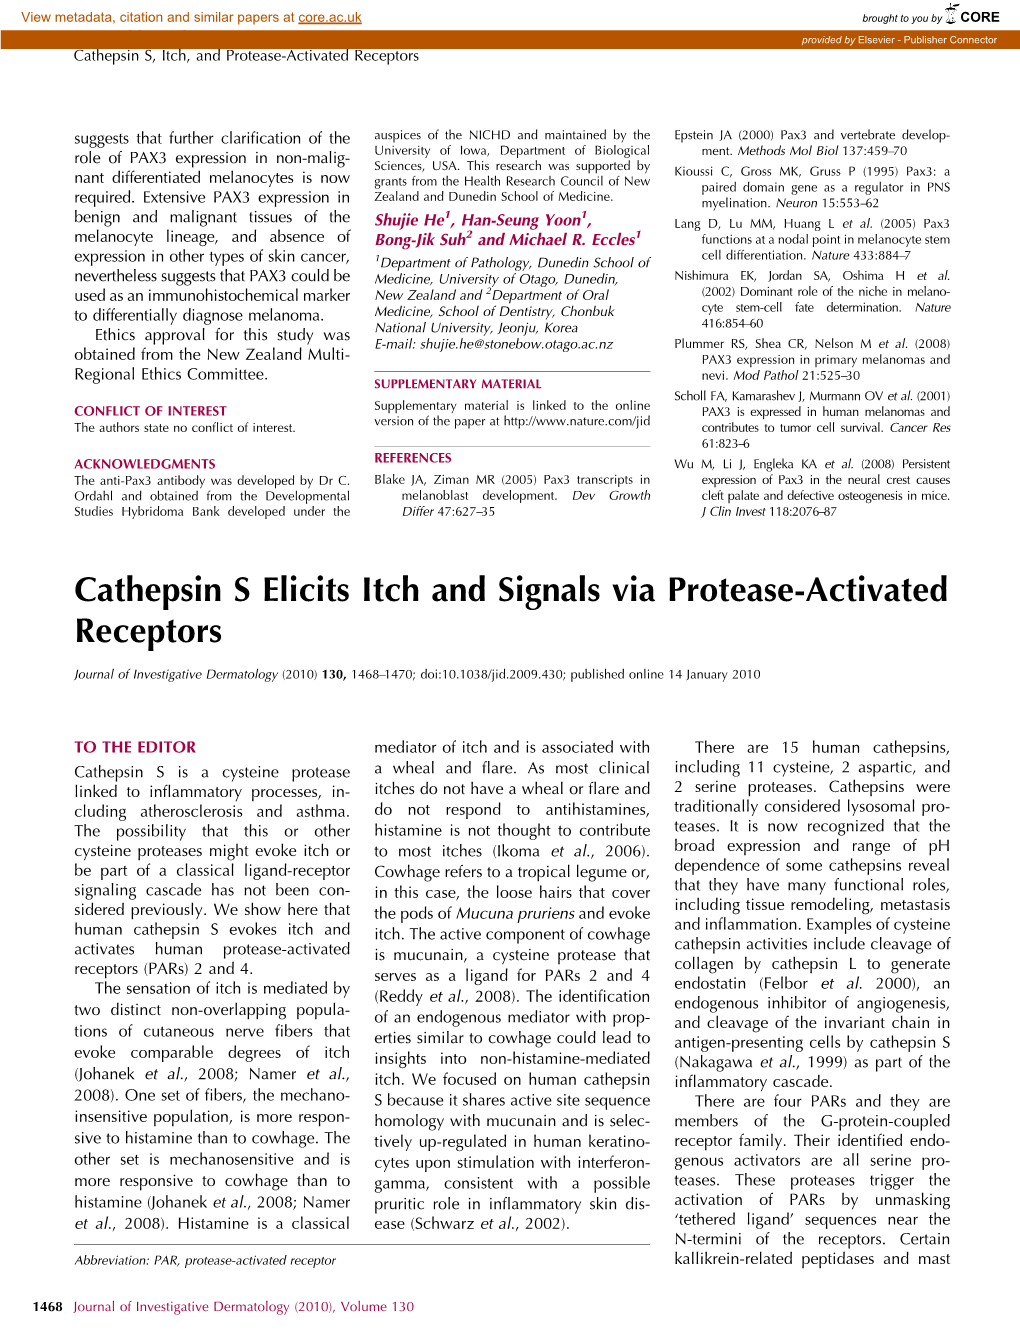 Cathepsin S Elicits Itch and Signals Via Protease-Activated Receptors